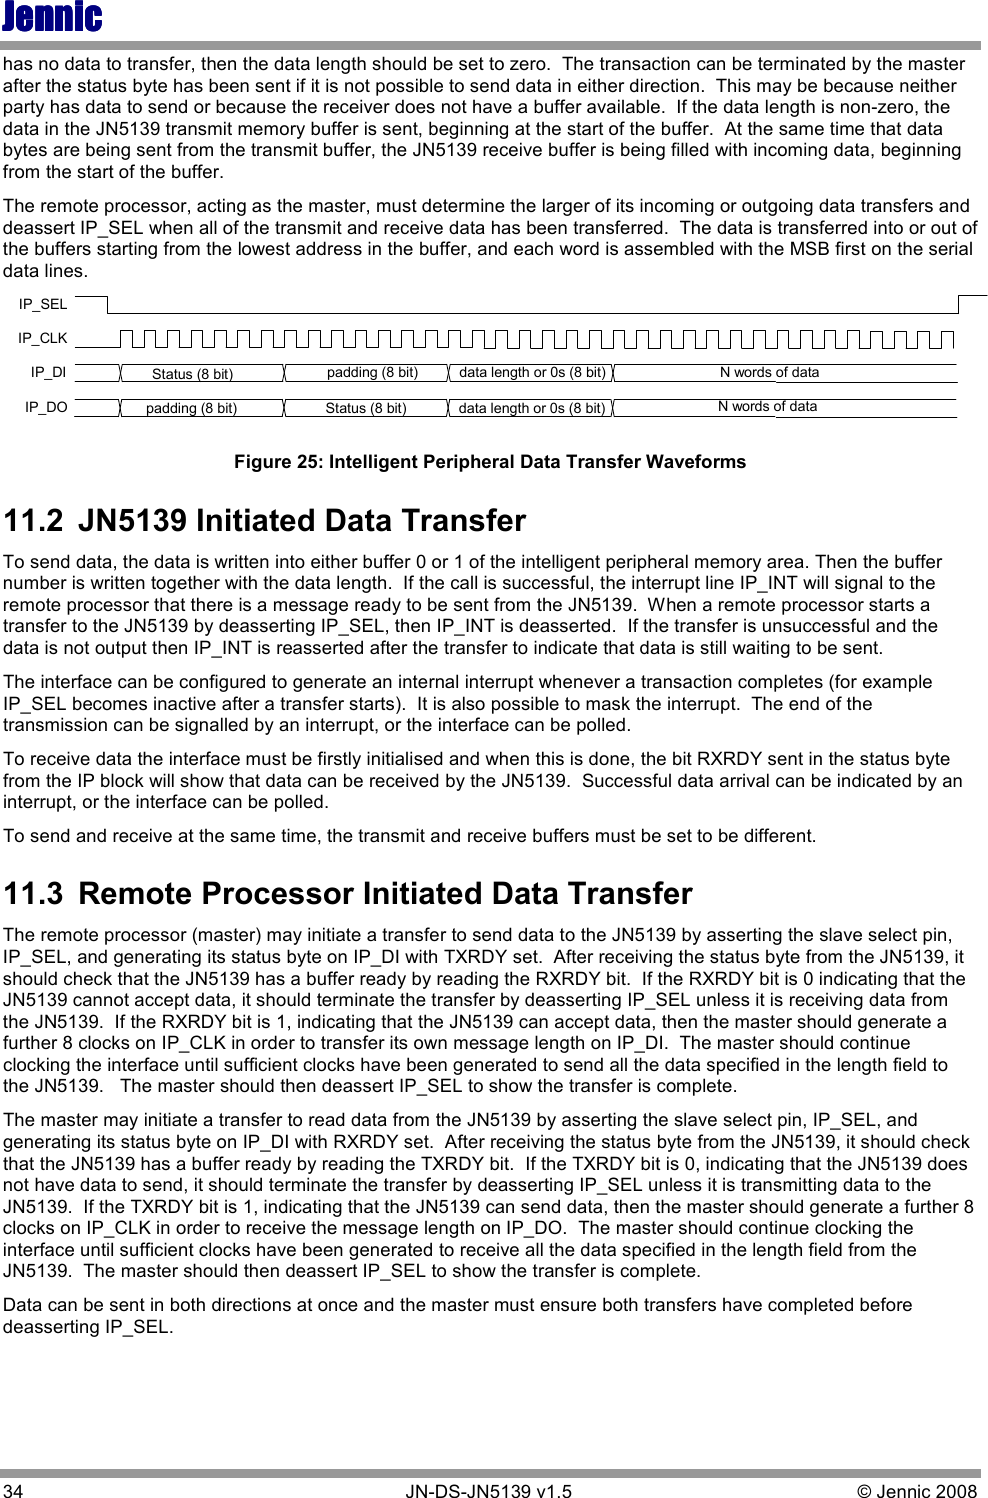 JennicJennicJennicJennic 34        JN-DS-JN5139 v1.5  © Jennic 2008  has no data to transfer, then the data length should be set to zero.  The transaction can be terminated by the master after the status byte has been sent if it is not possible to send data in either direction.  This may be because neither party has data to send or because the receiver does not have a buffer available.  If the data length is non-zero, the data in the JN5139 transmit memory buffer is sent, beginning at the start of the buffer.  At the same time that data bytes are being sent from the transmit buffer, the JN5139 receive buffer is being filled with incoming data, beginning from the start of the buffer.  The remote processor, acting as the master, must determine the larger of its incoming or outgoing data transfers and deassert IP_SEL when all of the transmit and receive data has been transferred.  The data is transferred into or out of the buffers starting from the lowest address in the buffer, and each word is assembled with the MSB first on the serial data lines. IP_SELIP_CLKIP_DI Status (8 bit)  N words of dataIP_DOdata length or 0s (8 bit)Status (8 bit) N words of datadata length or 0s (8 bit)padding (8 bit)padding (8 bit)Figure 25: Intelligent Peripheral Data Transfer Waveforms 11.2  JN5139 Initiated Data Transfer To send data, the data is written into either buffer 0 or 1 of the intelligent peripheral memory area. Then the buffer number is written together with the data length.  If the call is successful, the interrupt line IP_INT will signal to the remote processor that there is a message ready to be sent from the JN5139.  When a remote processor starts a transfer to the JN5139 by deasserting IP_SEL, then IP_INT is deasserted.  If the transfer is unsuccessful and the data is not output then IP_INT is reasserted after the transfer to indicate that data is still waiting to be sent. The interface can be configured to generate an internal interrupt whenever a transaction completes (for example IP_SEL becomes inactive after a transfer starts).  It is also possible to mask the interrupt.  The end of the transmission can be signalled by an interrupt, or the interface can be polled. To receive data the interface must be firstly initialised and when this is done, the bit RXRDY sent in the status byte from the IP block will show that data can be received by the JN5139.  Successful data arrival can be indicated by an interrupt, or the interface can be polled.  To send and receive at the same time, the transmit and receive buffers must be set to be different. 11.3  Remote Processor Initiated Data Transfer The remote processor (master) may initiate a transfer to send data to the JN5139 by asserting the slave select pin, IP_SEL, and generating its status byte on IP_DI with TXRDY set.  After receiving the status byte from the JN5139, it should check that the JN5139 has a buffer ready by reading the RXRDY bit.  If the RXRDY bit is 0 indicating that the JN5139 cannot accept data, it should terminate the transfer by deasserting IP_SEL unless it is receiving data from the JN5139.  If the RXRDY bit is 1, indicating that the JN5139 can accept data, then the master should generate a further 8 clocks on IP_CLK in order to transfer its own message length on IP_DI.  The master should continue clocking the interface until sufficient clocks have been generated to send all the data specified in the length field to the JN5139.   The master should then deassert IP_SEL to show the transfer is complete. The master may initiate a transfer to read data from the JN5139 by asserting the slave select pin, IP_SEL, and generating its status byte on IP_DI with RXRDY set.  After receiving the status byte from the JN5139, it should check that the JN5139 has a buffer ready by reading the TXRDY bit.  If the TXRDY bit is 0, indicating that the JN5139 does not have data to send, it should terminate the transfer by deasserting IP_SEL unless it is transmitting data to the JN5139.  If the TXRDY bit is 1, indicating that the JN5139 can send data, then the master should generate a further 8 clocks on IP_CLK in order to receive the message length on IP_DO.  The master should continue clocking the interface until sufficient clocks have been generated to receive all the data specified in the length field from the JN5139.  The master should then deassert IP_SEL to show the transfer is complete. Data can be sent in both directions at once and the master must ensure both transfers have completed before deasserting IP_SEL. 